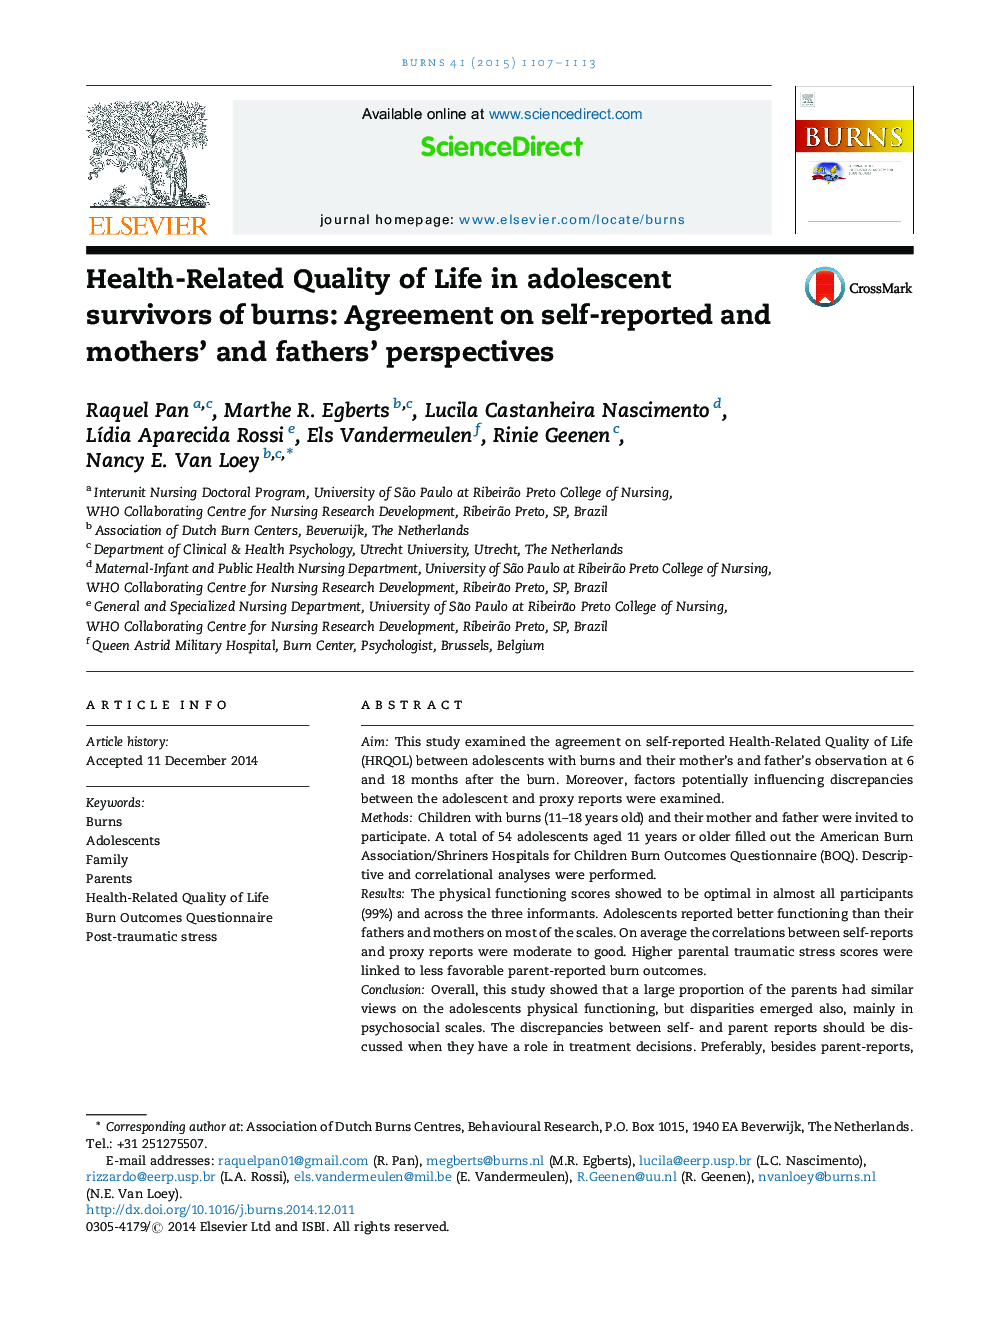 Health-Related Quality of Life in adolescent survivors of burns: Agreement on self-reported and mothers' and fathers' perspectives